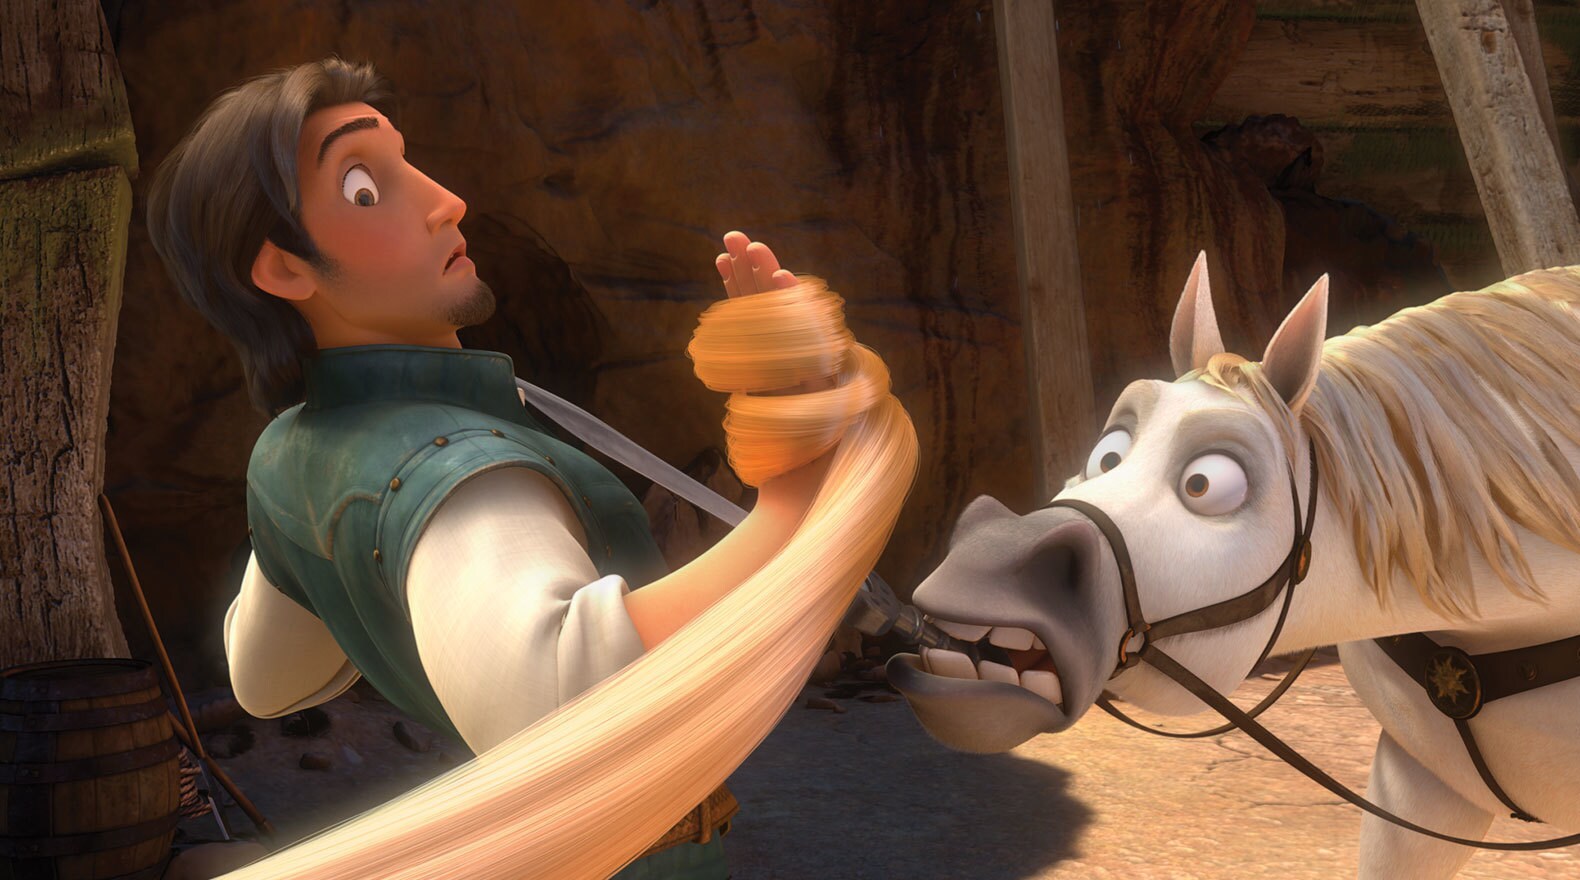 Flynn Rider and Maximus (horse) look at hair wrapped on Flynn's hand